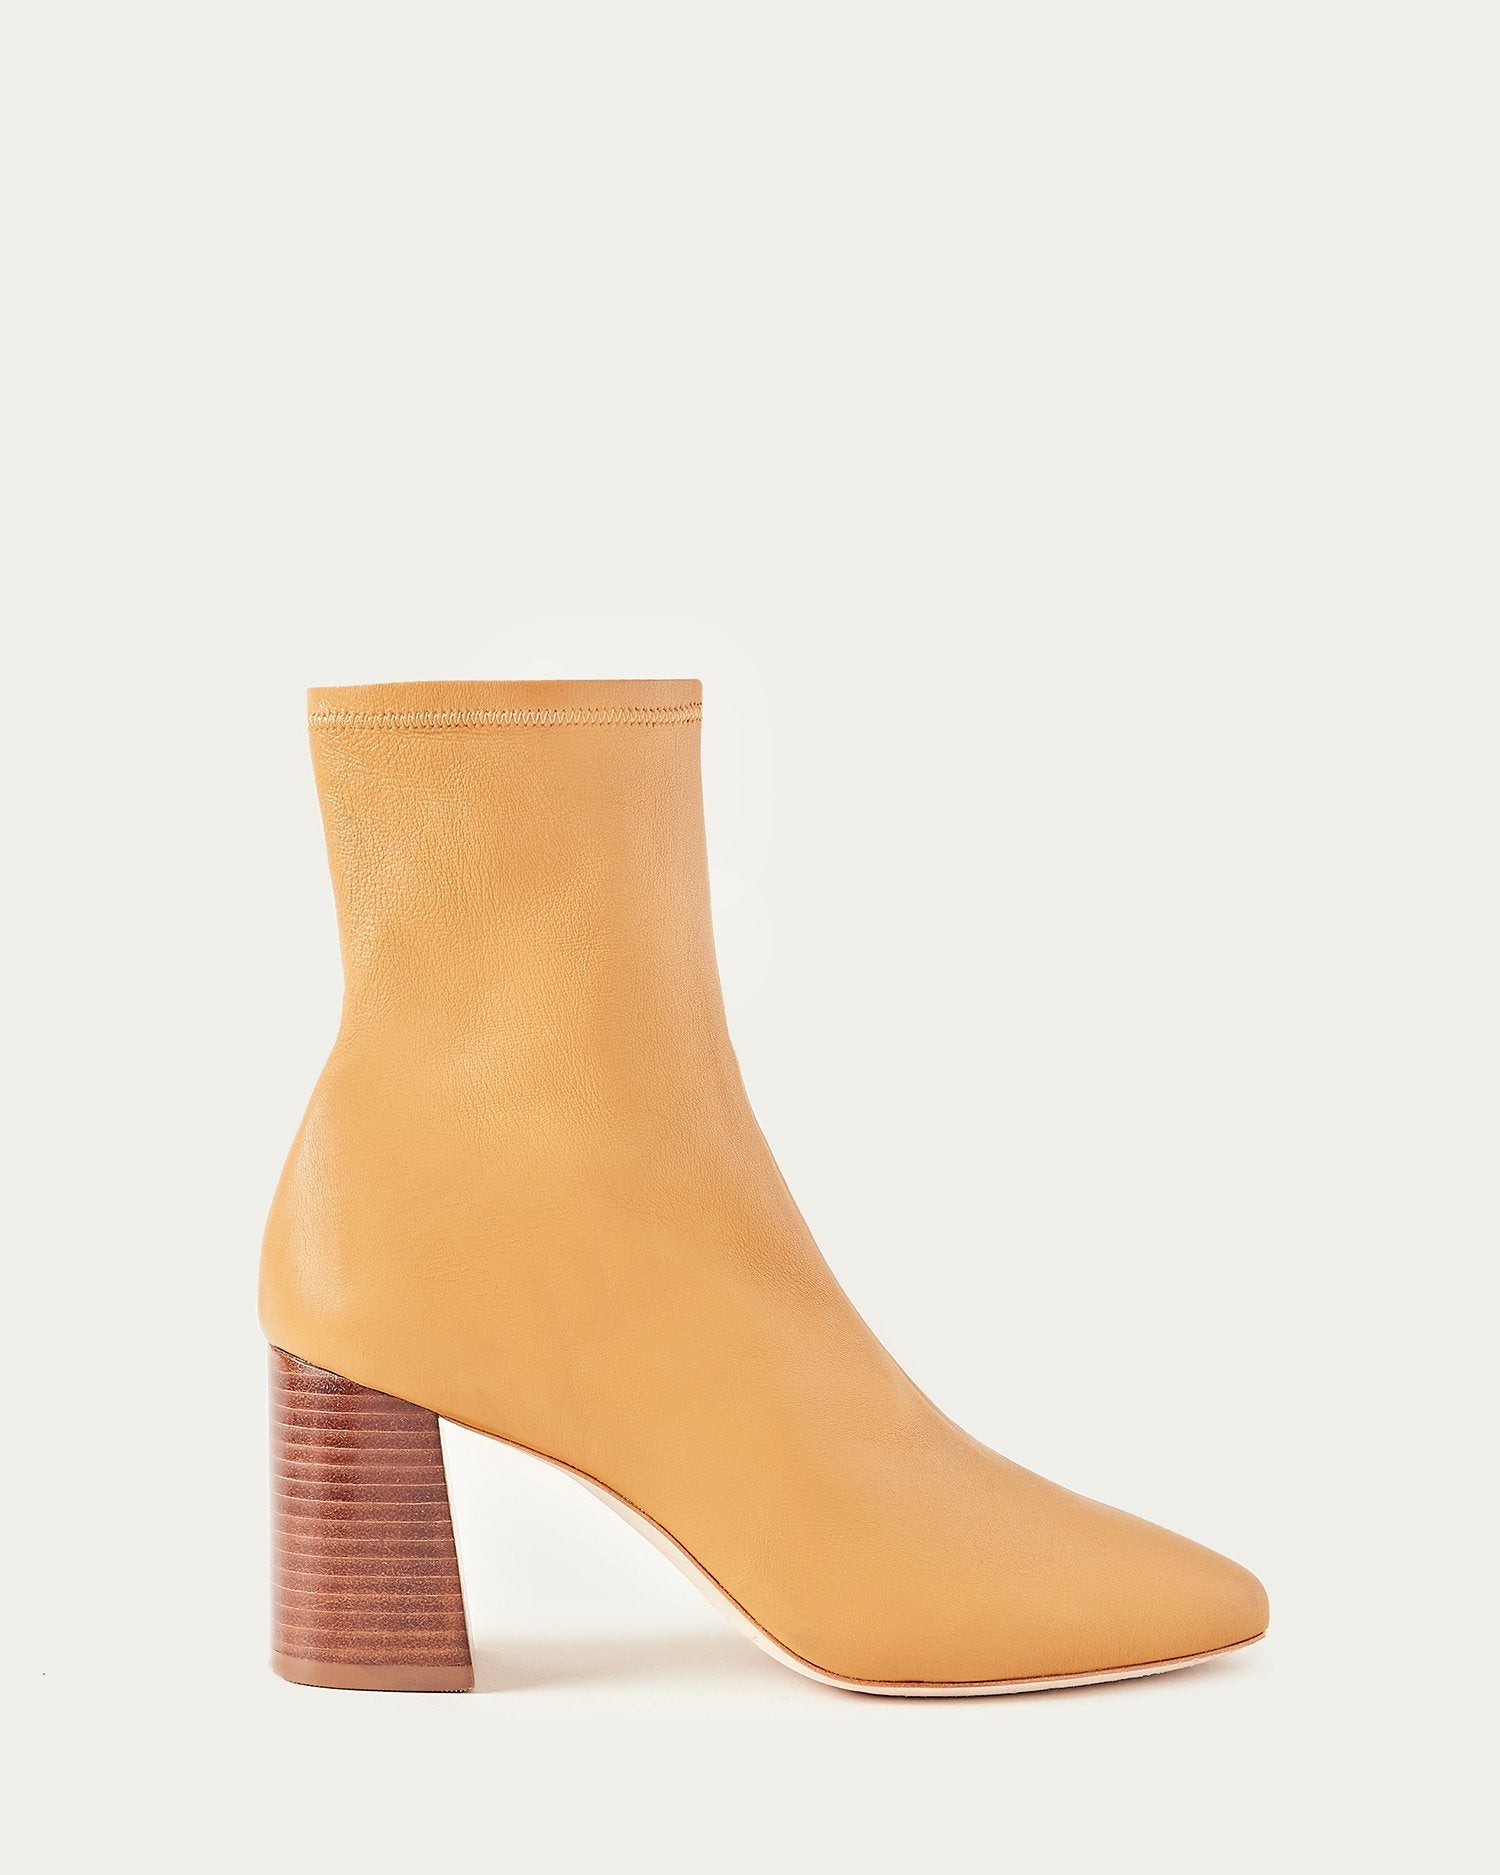 camel color leather boots